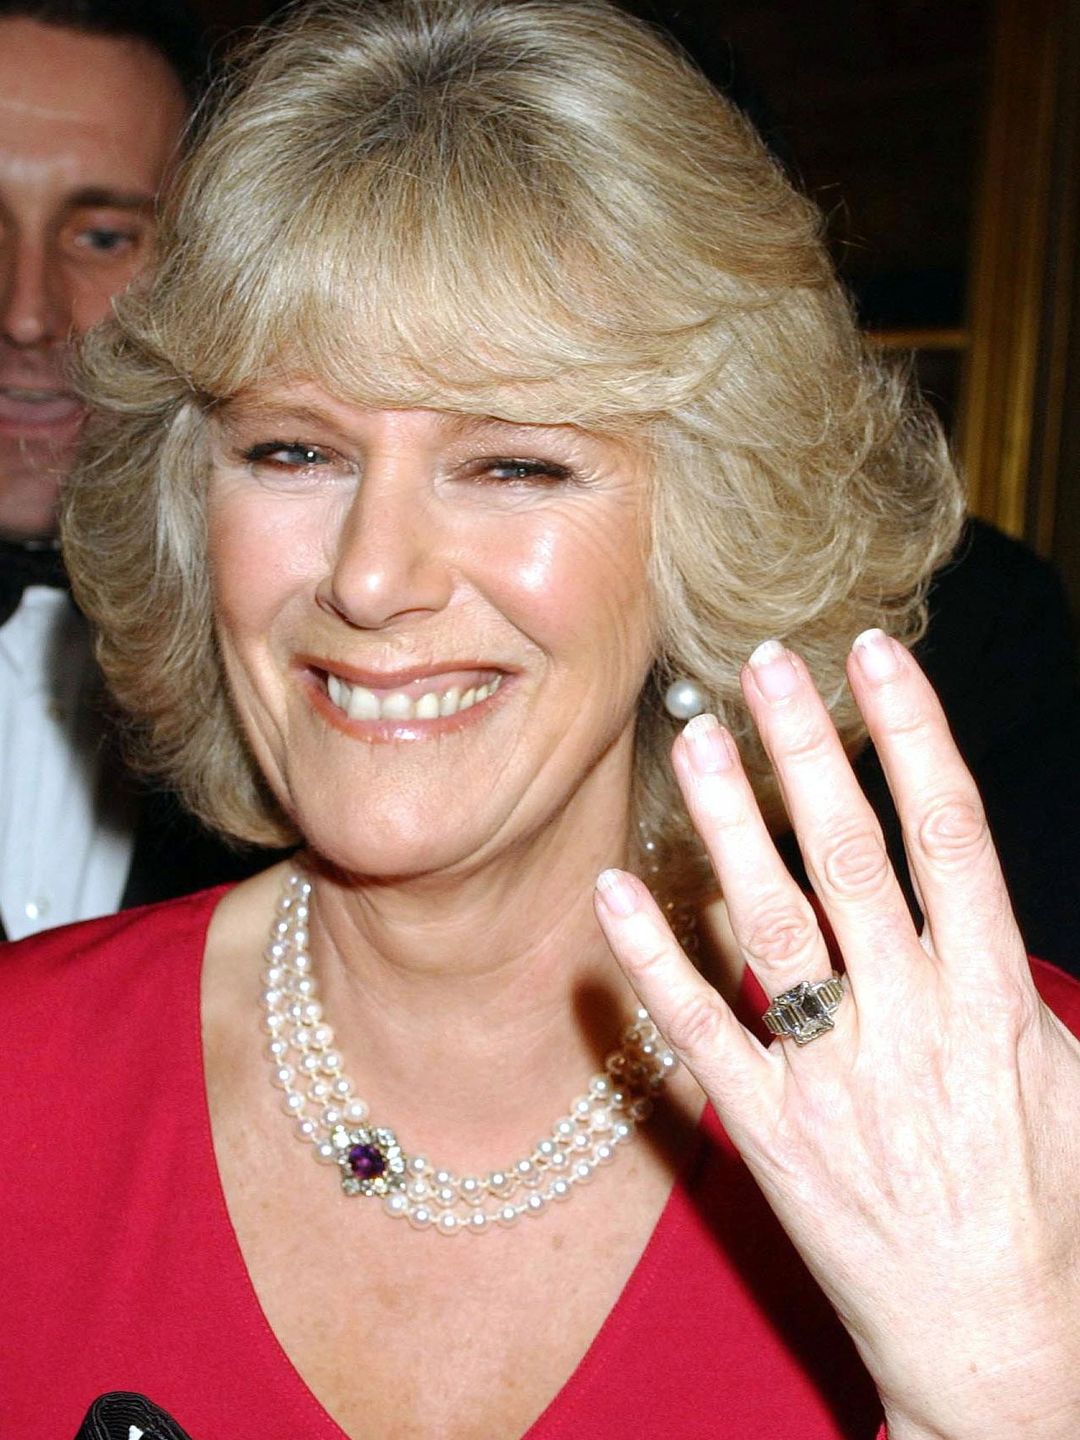 Camilla smiling and showing off her ring in February 2005